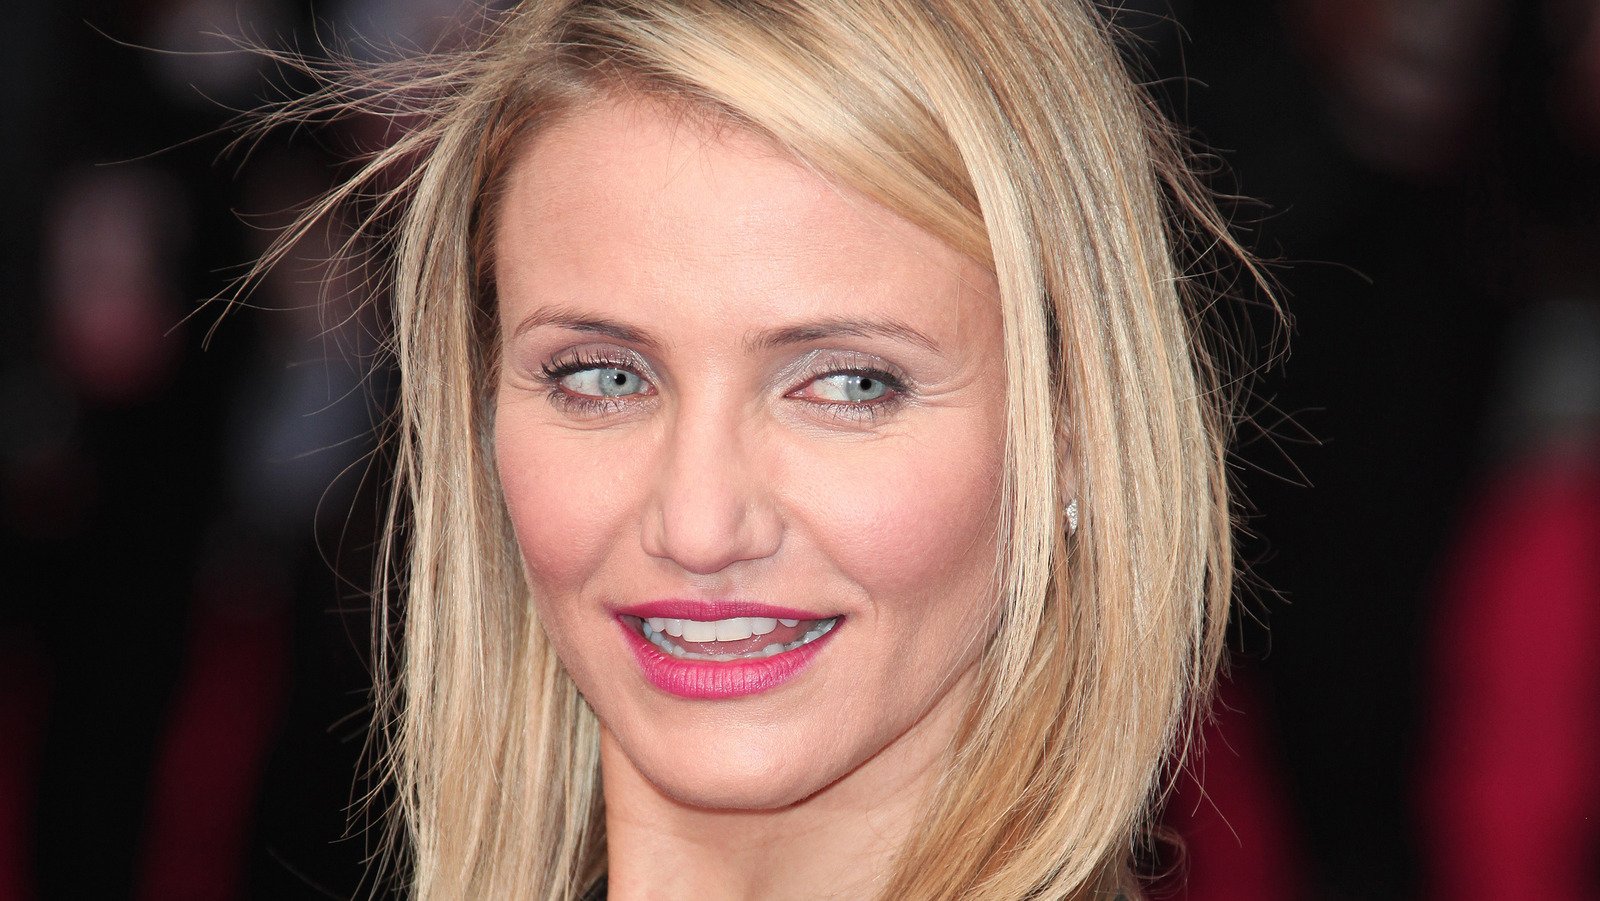 What Cameron Diaz's exes have said about her - cover